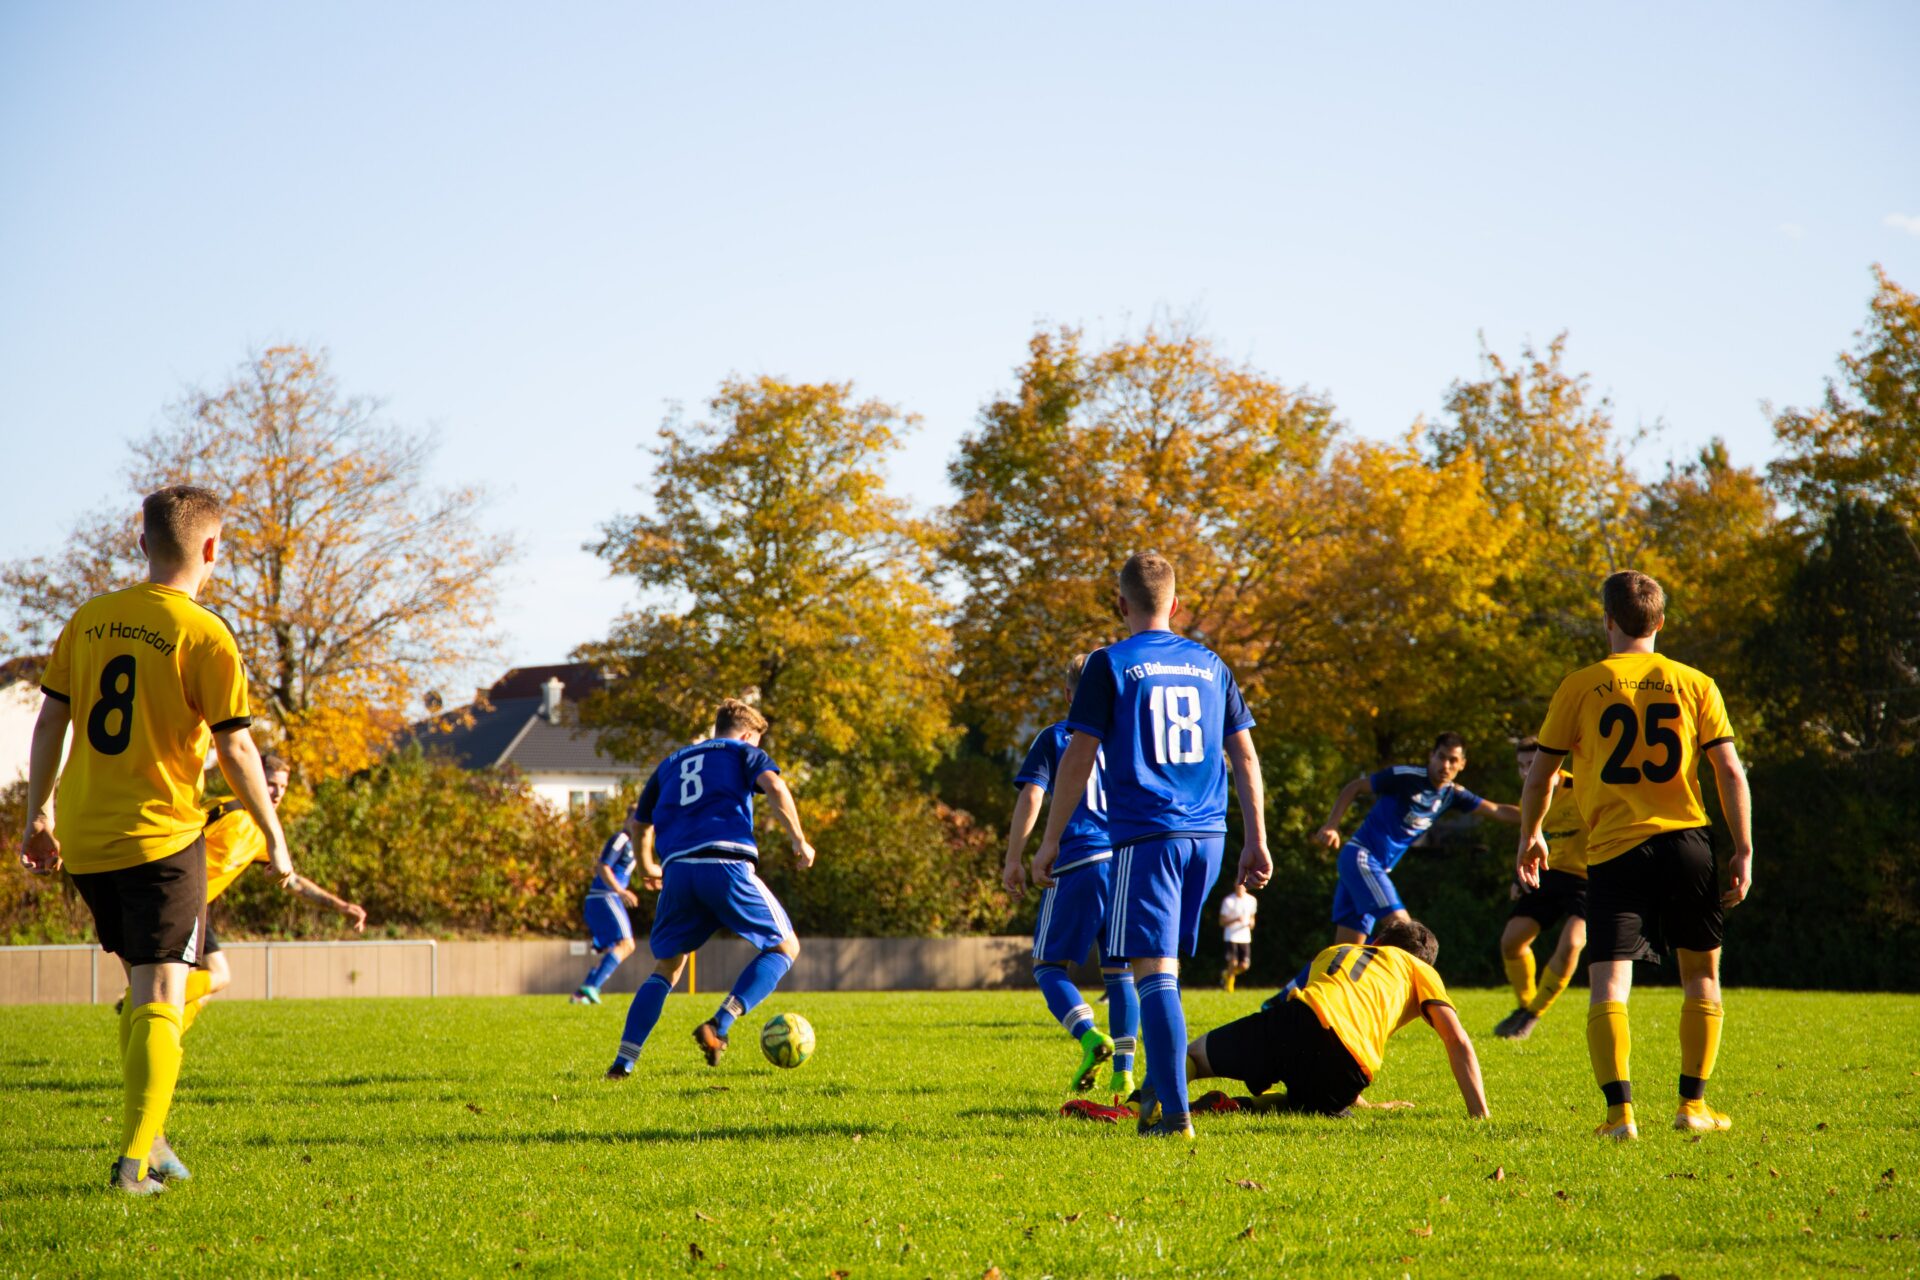 Two soccer teams wearing blue and yellow going after the soccer ball